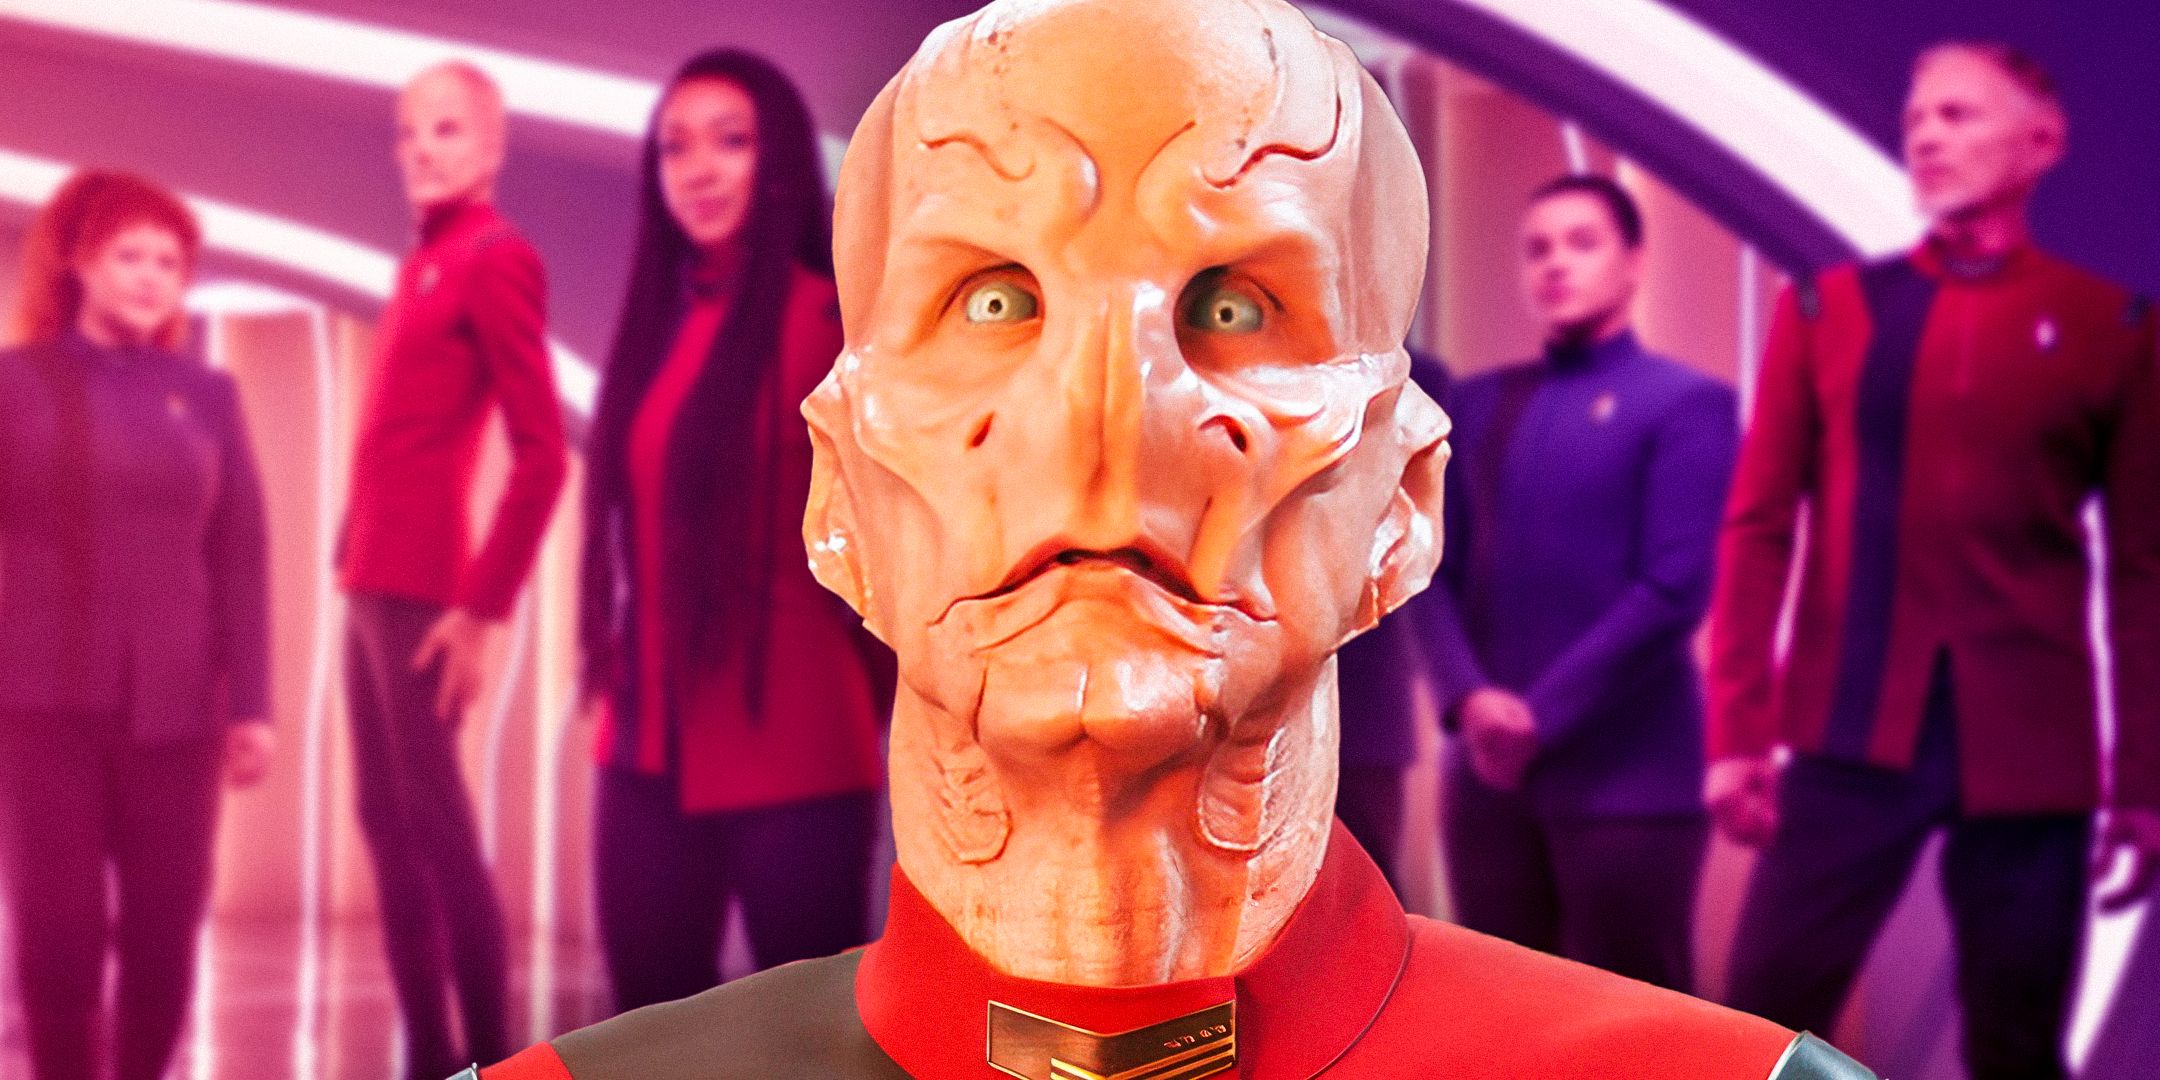 Saru (Doug Jones) looks off-screen with a faded image of the Star Trek: Discovery season 5 cast in the background.